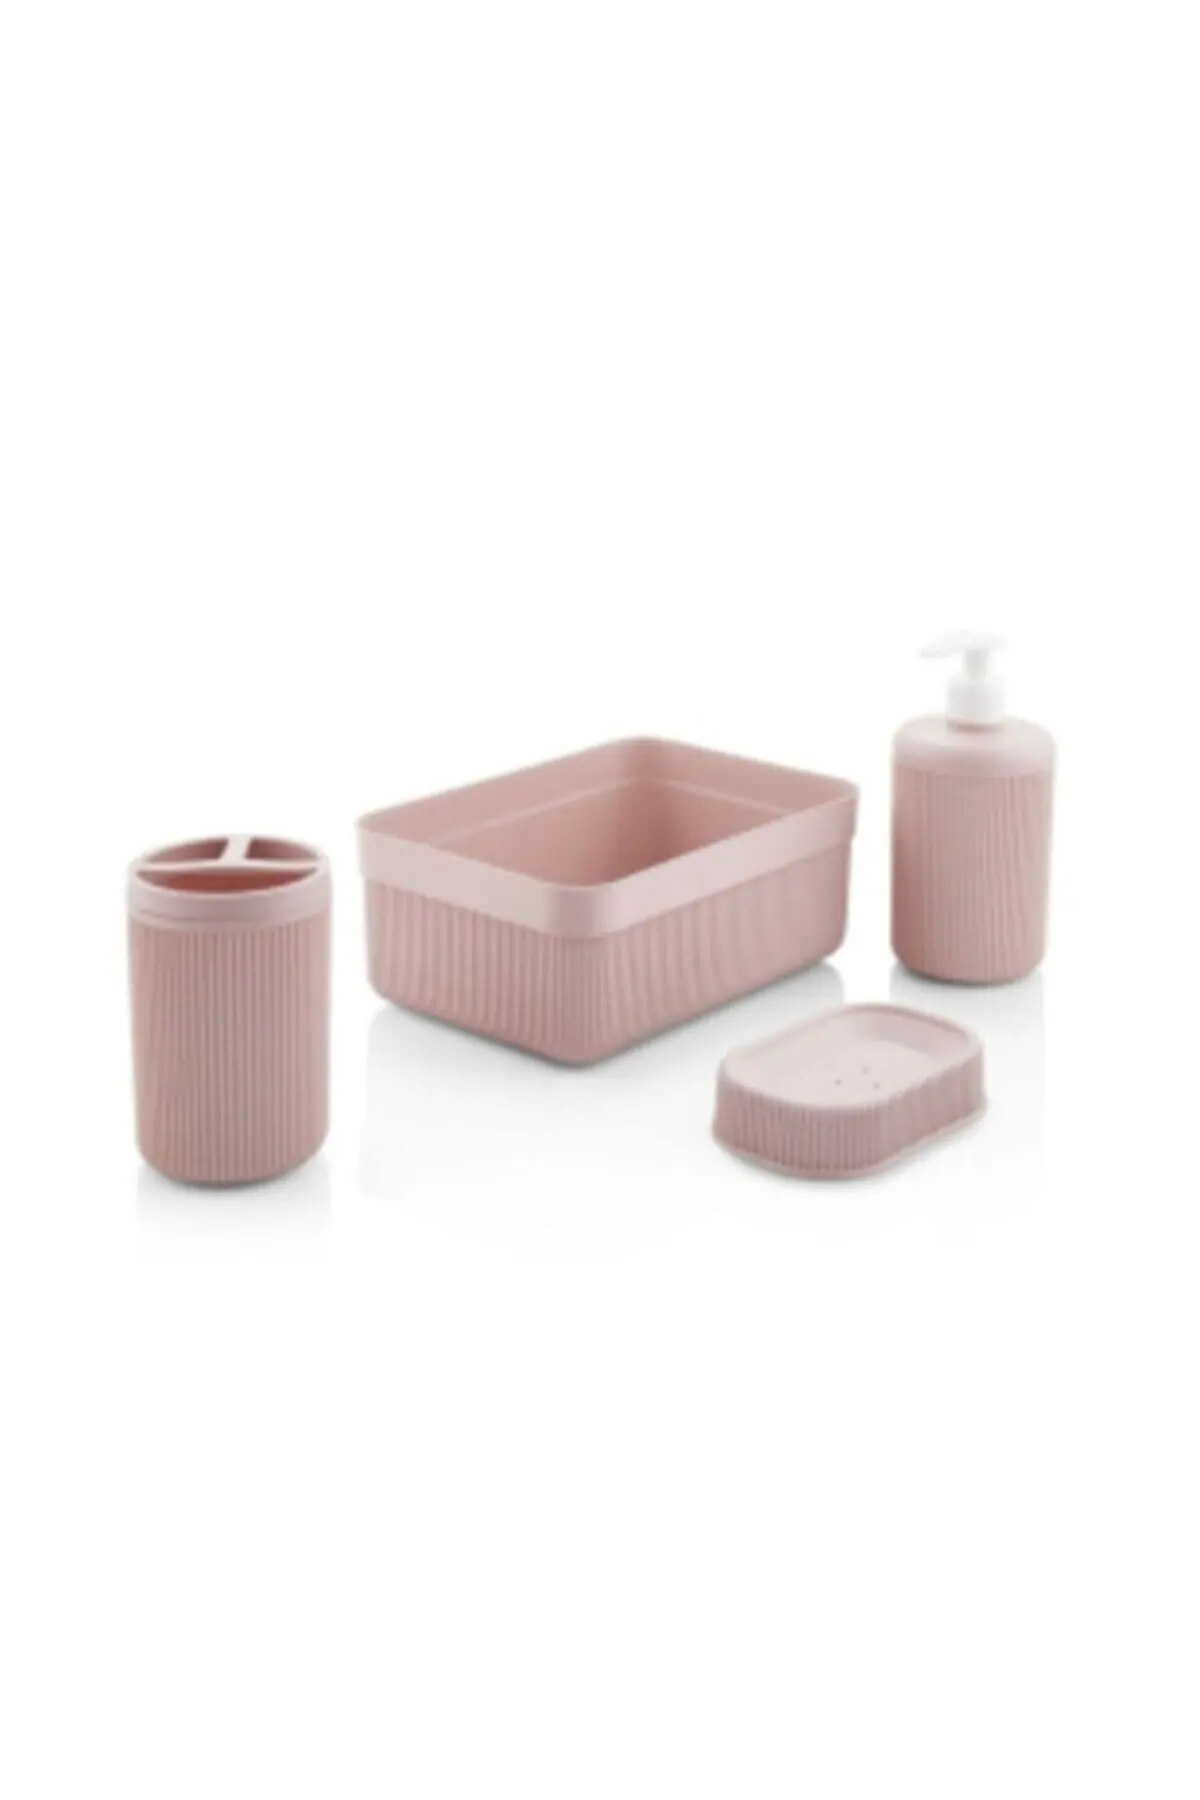 Bathroom Accessory Sets Acrylic 4 Pcs Pink Color Liquid And Solid Soap Dispenser Toothbrush And Organizer For Home Quality